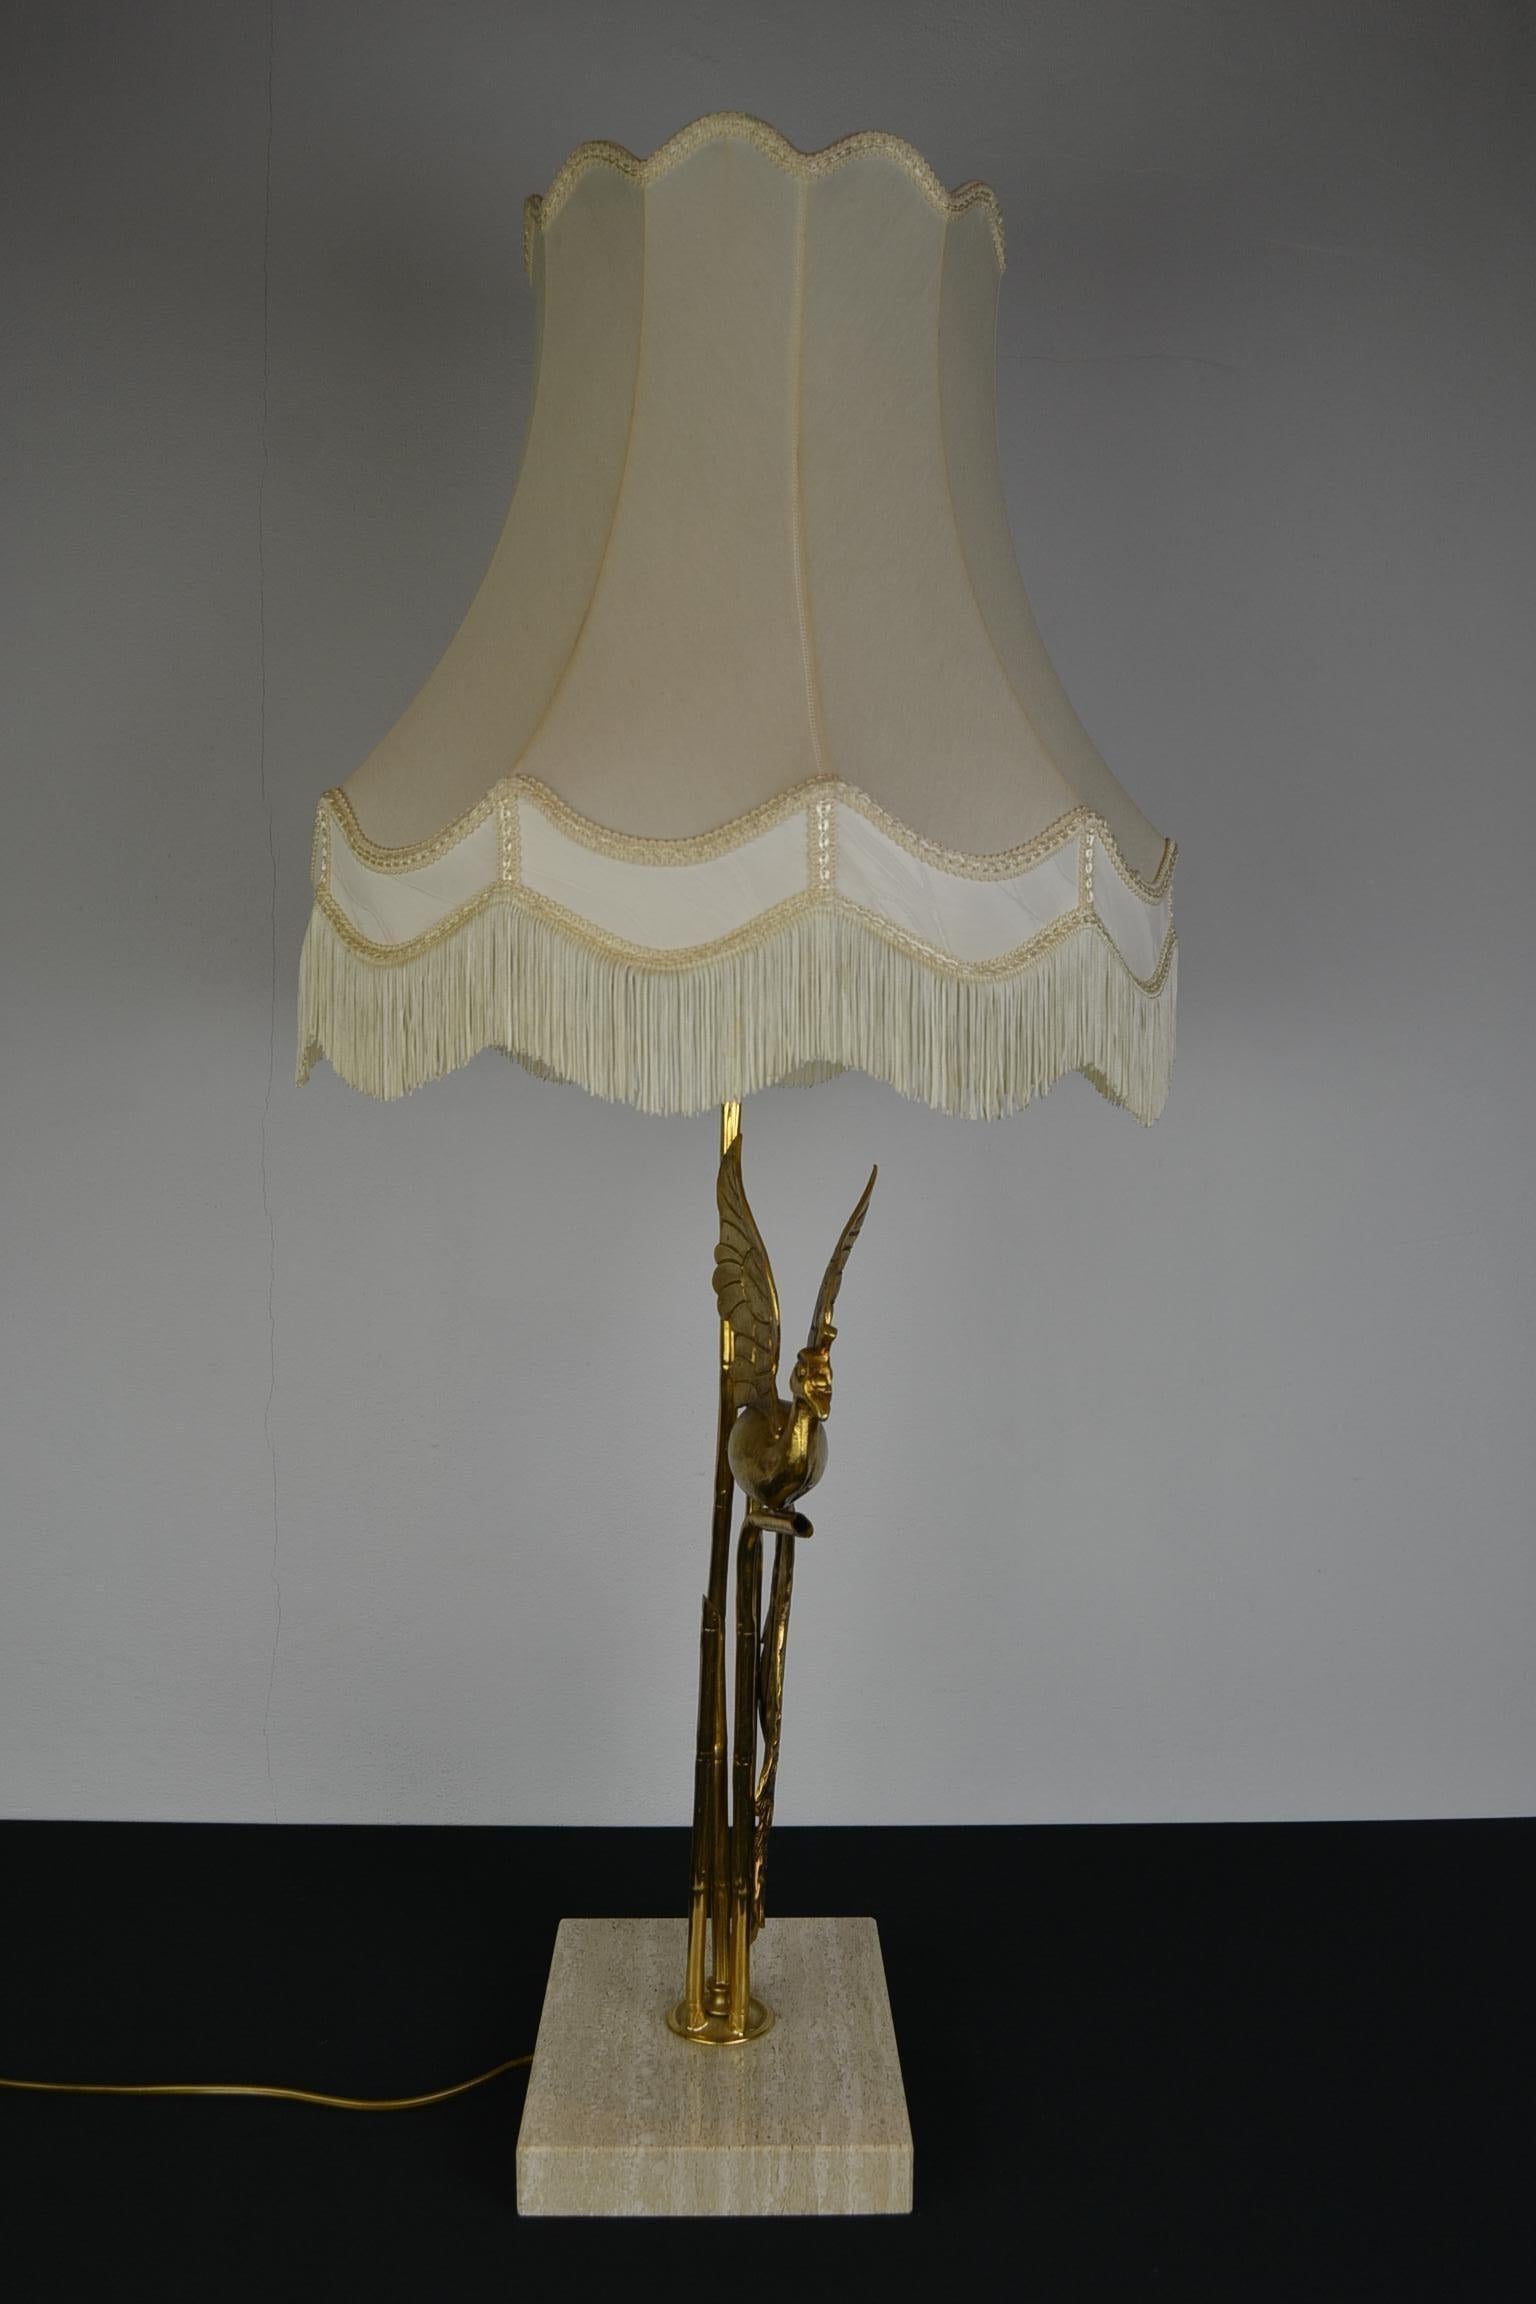 Large Lanciotto Galeotti Peacock Table Lamp for L'Originale, Italy, 1970s For Sale 2